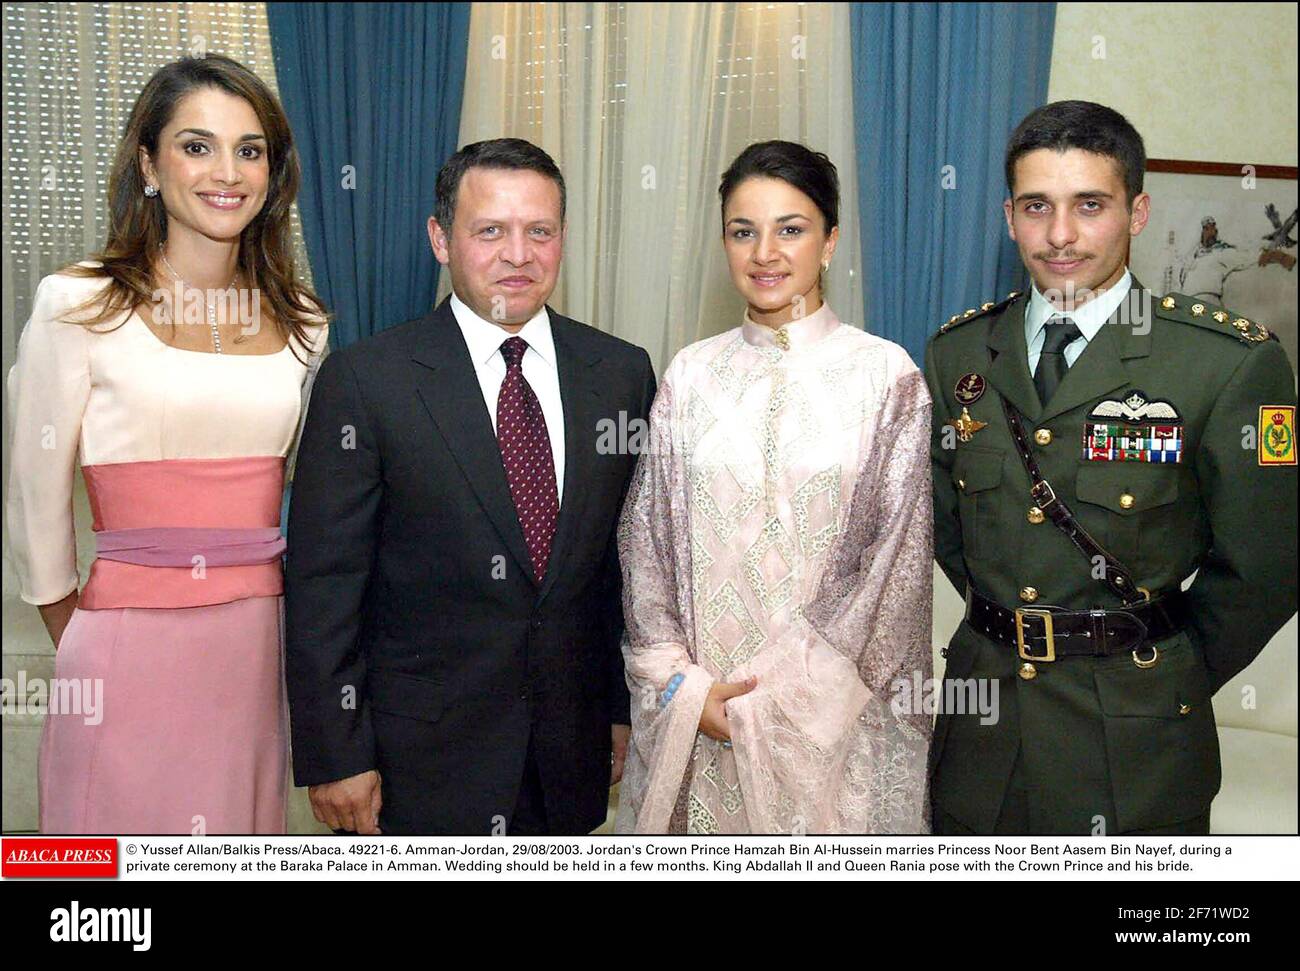 Files- © Yussef Allan/Balkis Press/ABACAPRESS.COM 49221-6. Amman-Jordan, 29/08/2003. Jordan's Crown Prince Hamzah Bin Al-Hussein marries Princess Noor Bent Aasem Bin Nayef, during a private ceremony at the Baraka Palace in Amman. Wedding should be held in a few months. King Abdallah II and Queen Rania pose with the Crown Prince and his bride. Stock Photo